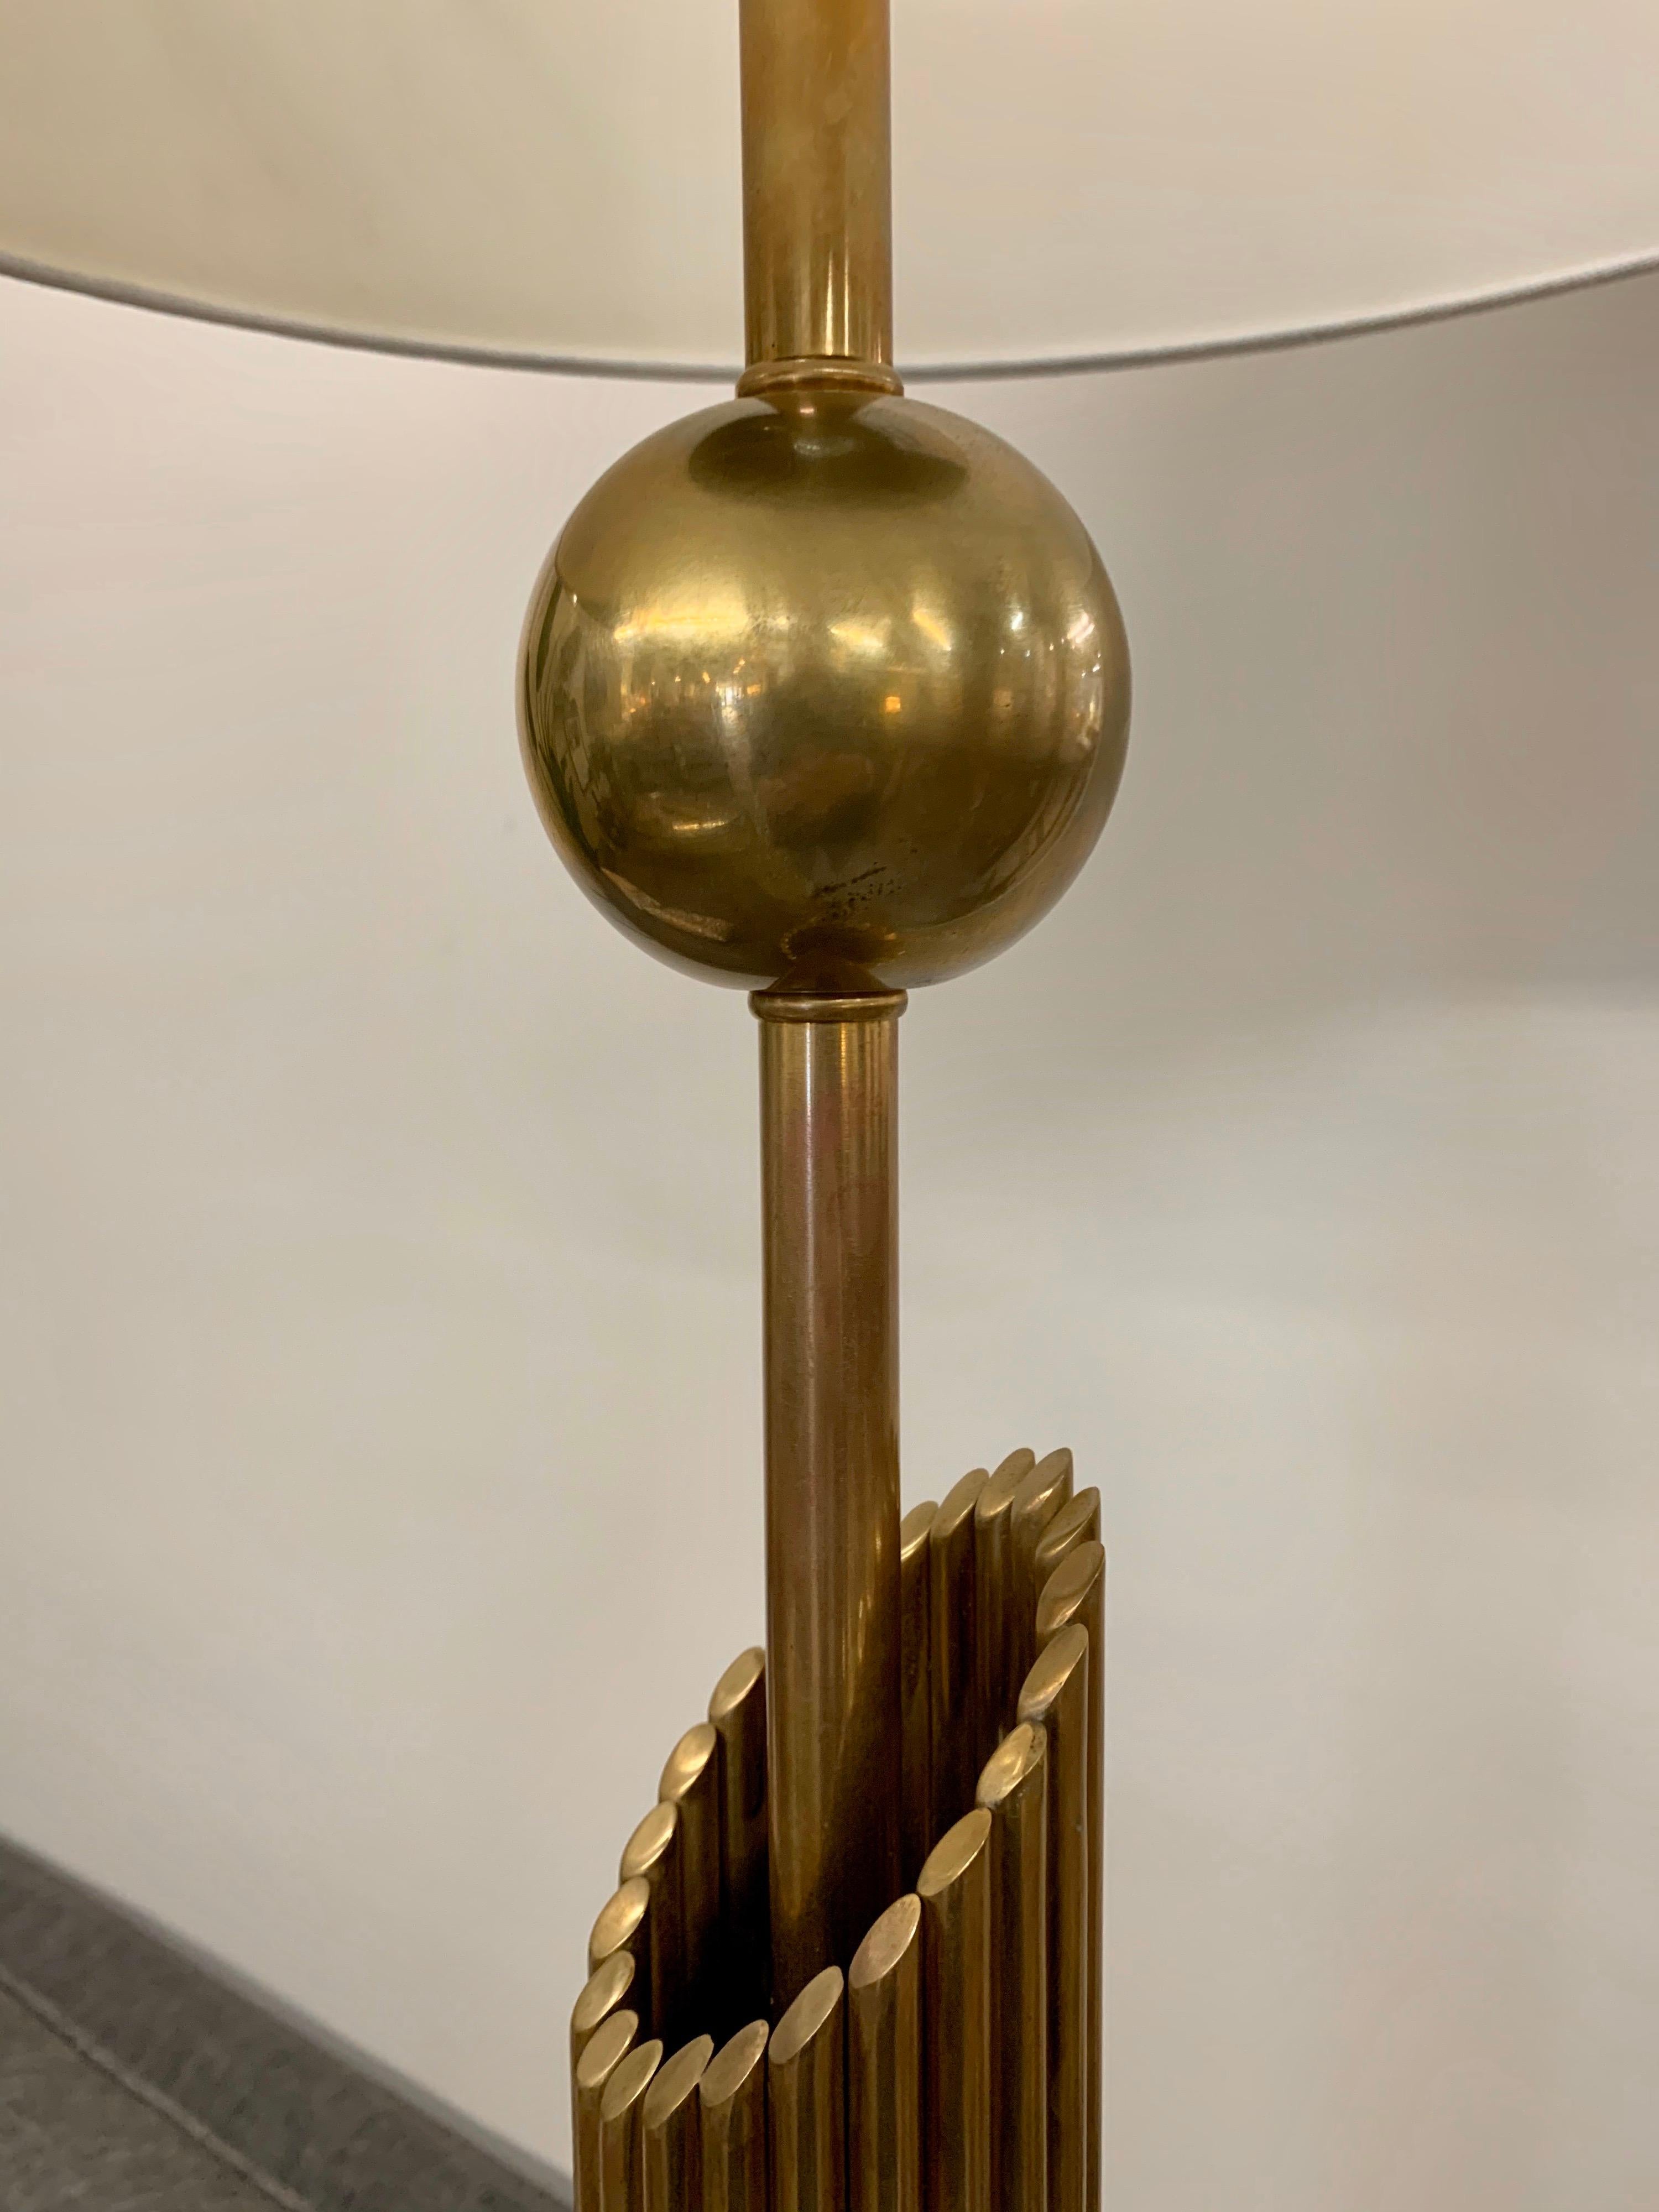 Stunning Mid-Century Modern tall floor lamp made of brass. Iconic modern looks and lines.